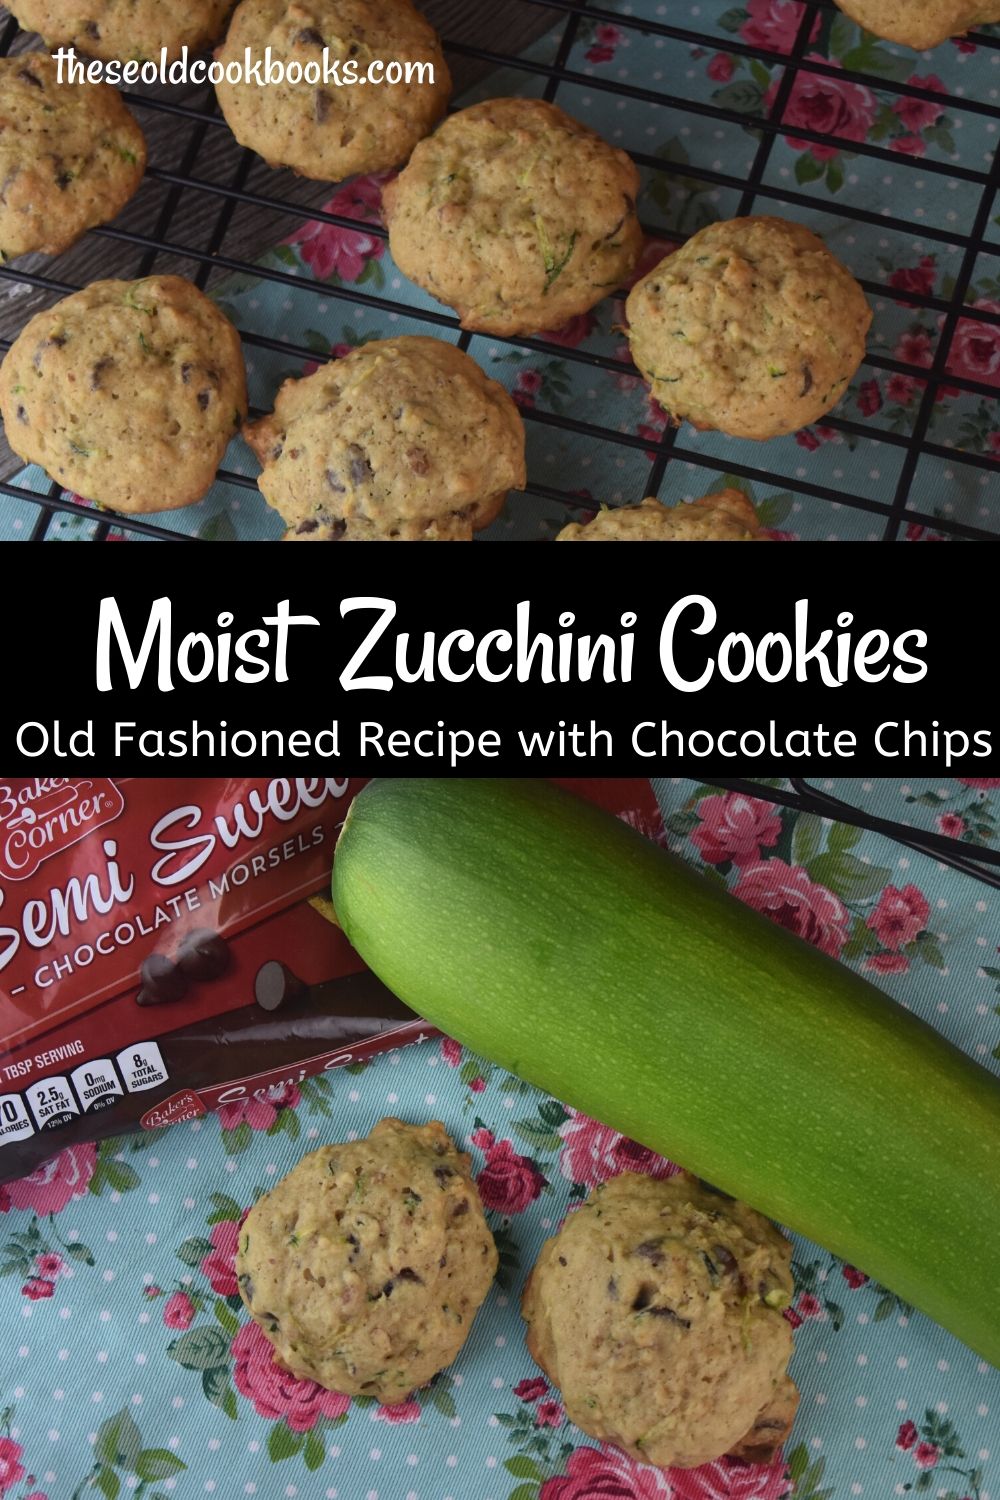 Moist Zucchini Cookies are an old-fashioned recipe with chocolate chips.